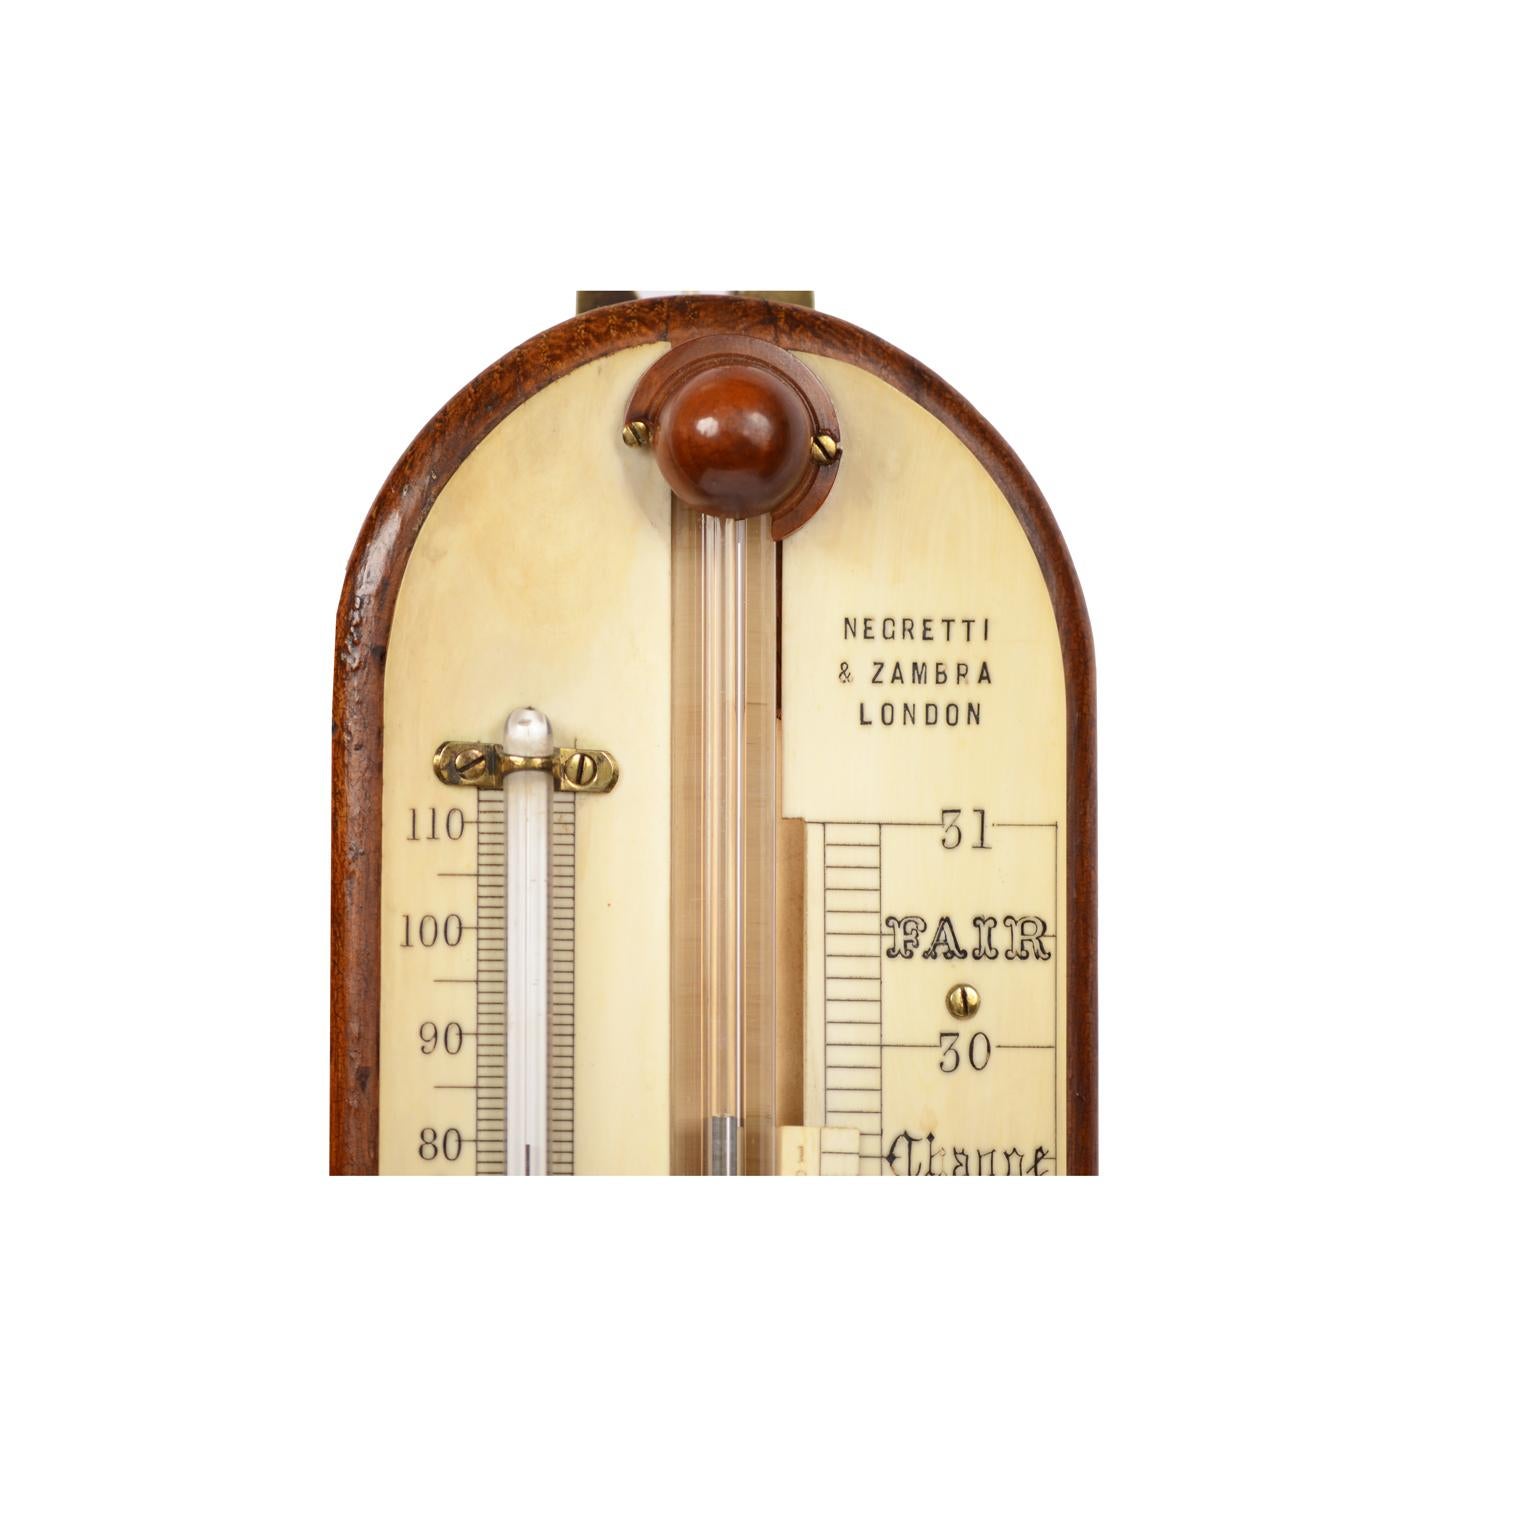 English stick oak barometer signed Negretti & Zambra, mid-19th century, complete with thermometer, Vernier reading the variation of atmospheric pressure and adjusting screw for setting the level of mercury. Very good condition and in order.